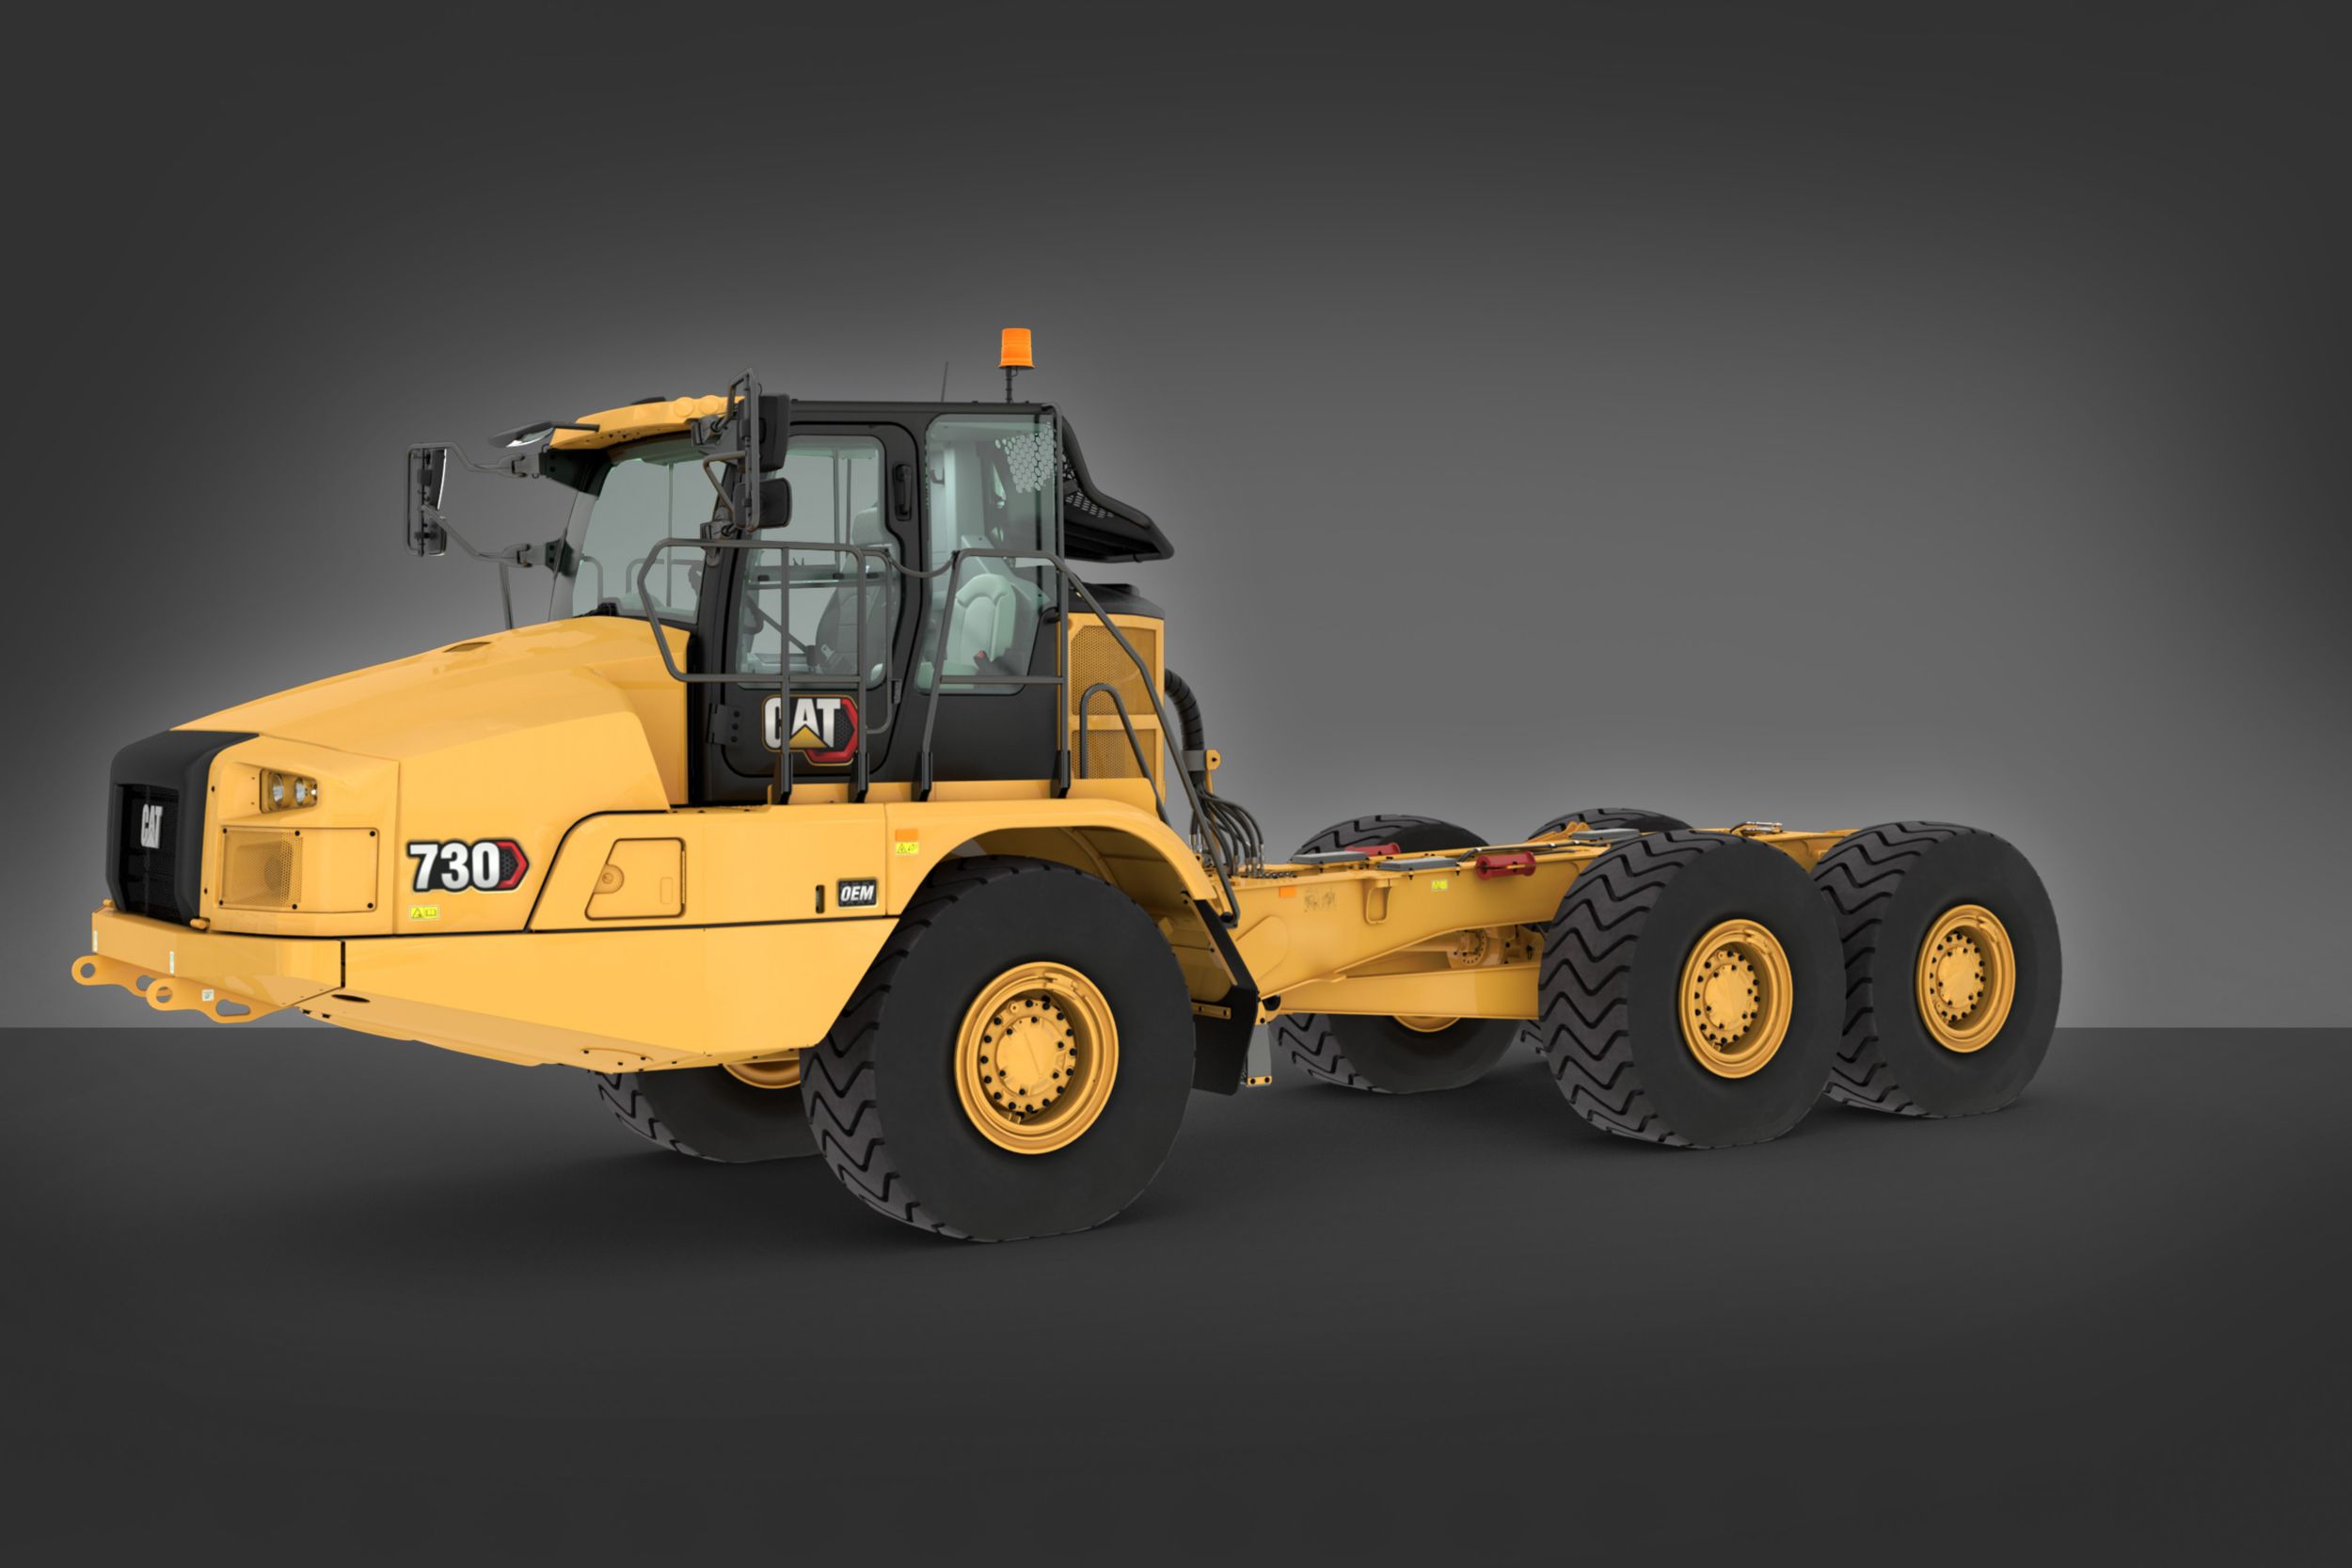 Customize the Cat 730 articulated truck bare chassis for your application.